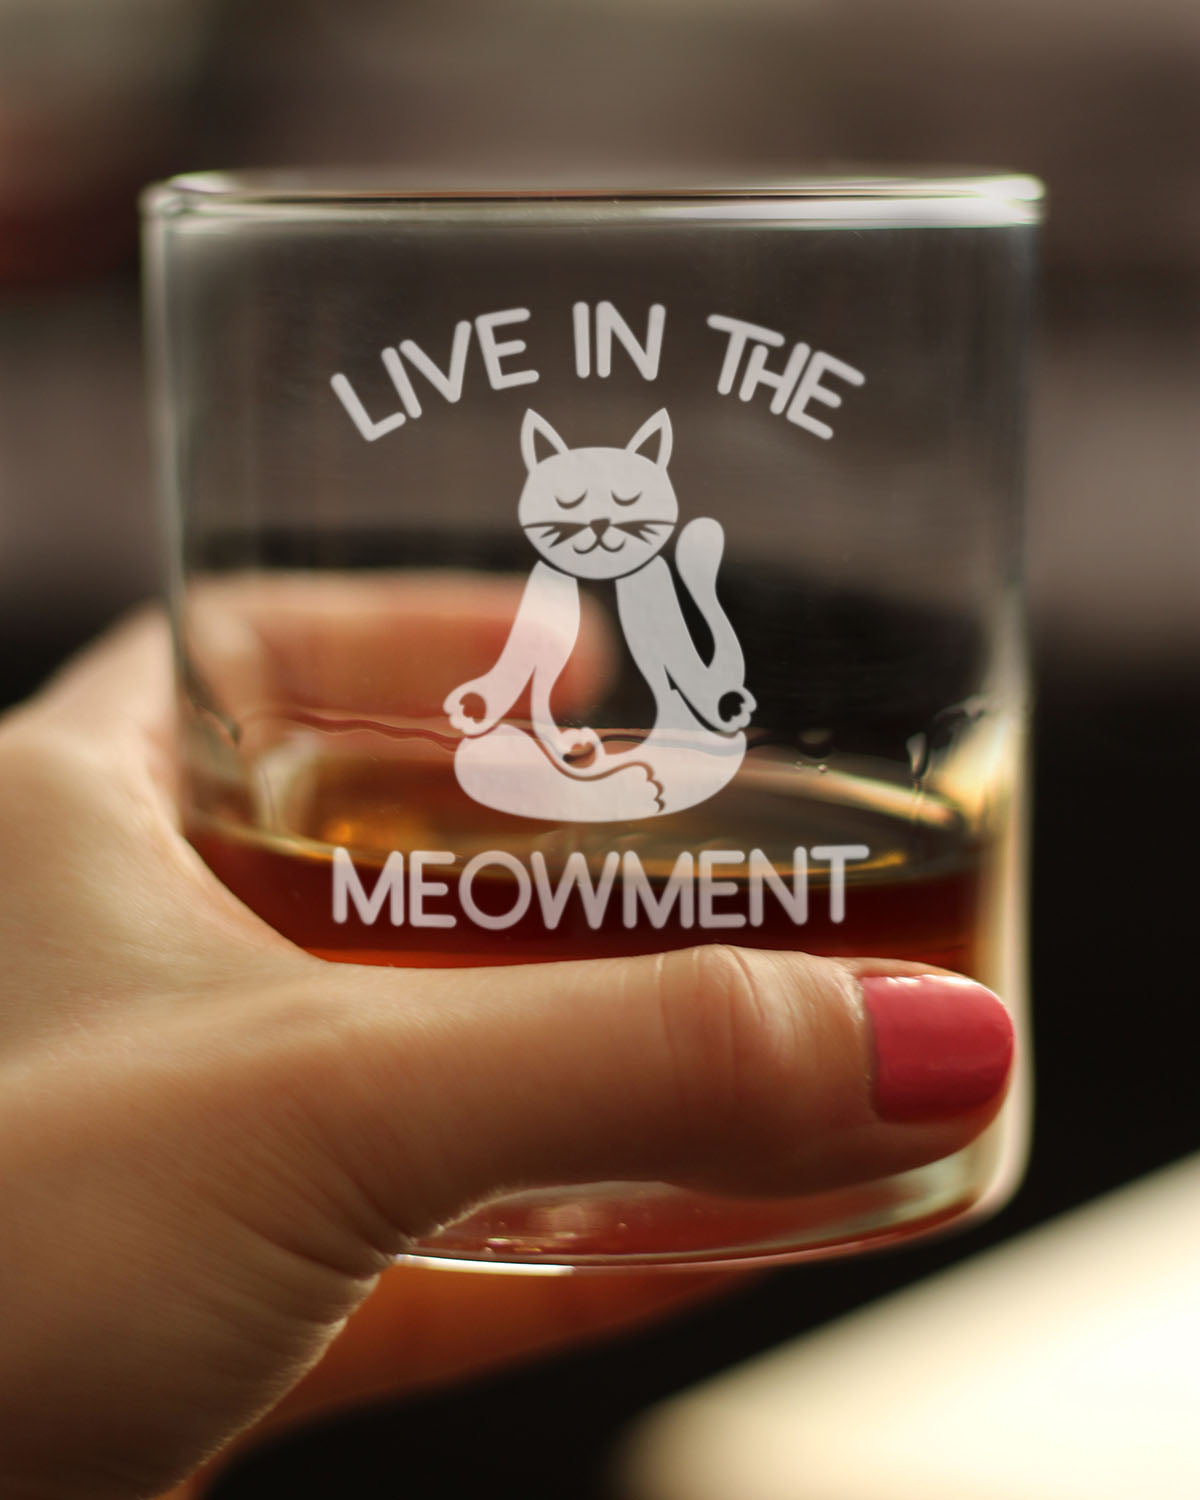 Live In The Meowment - Whiskey Rocks Glass - Funny Cat Gifts and Meditation Themed Decor - 10.25 Oz Glasses